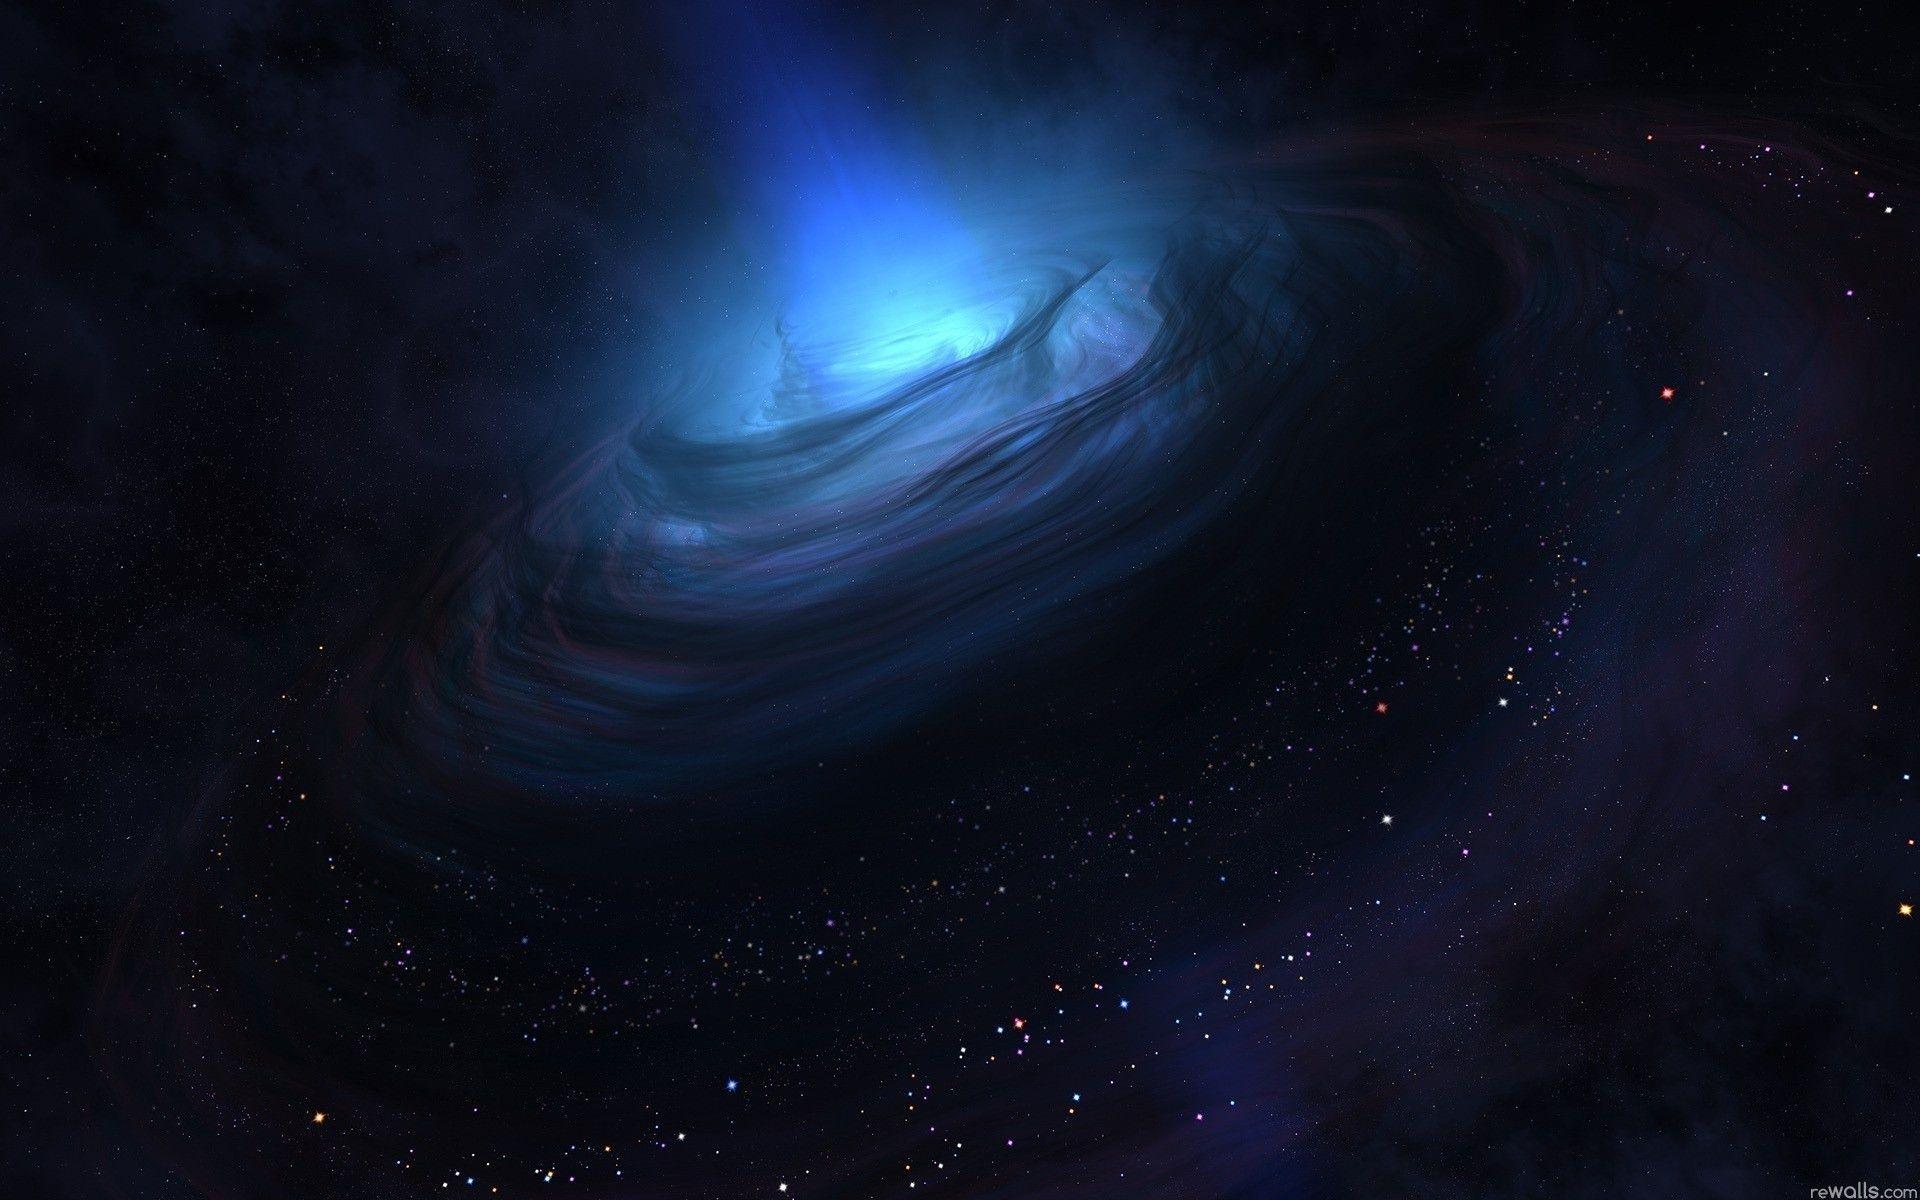 image For > Black Hole Wallpaper 1920x1200